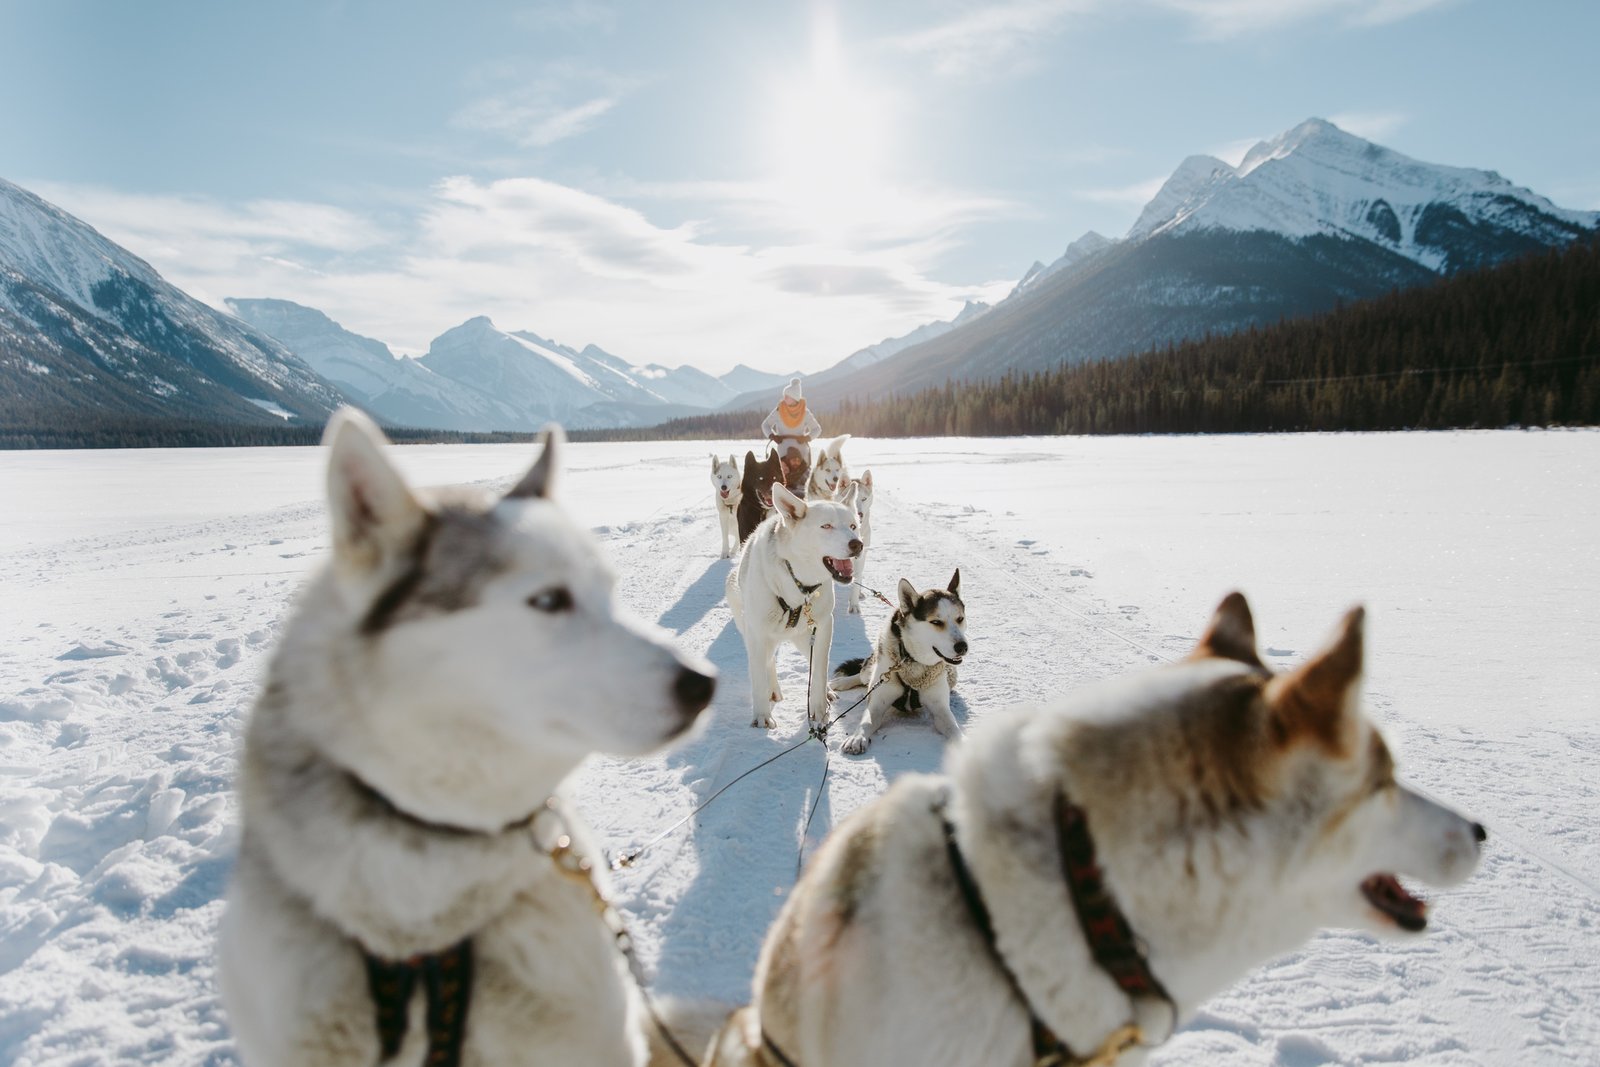 Group dogsledding with Snowy Owl Sled Dog Tours in Kananaskis Country.